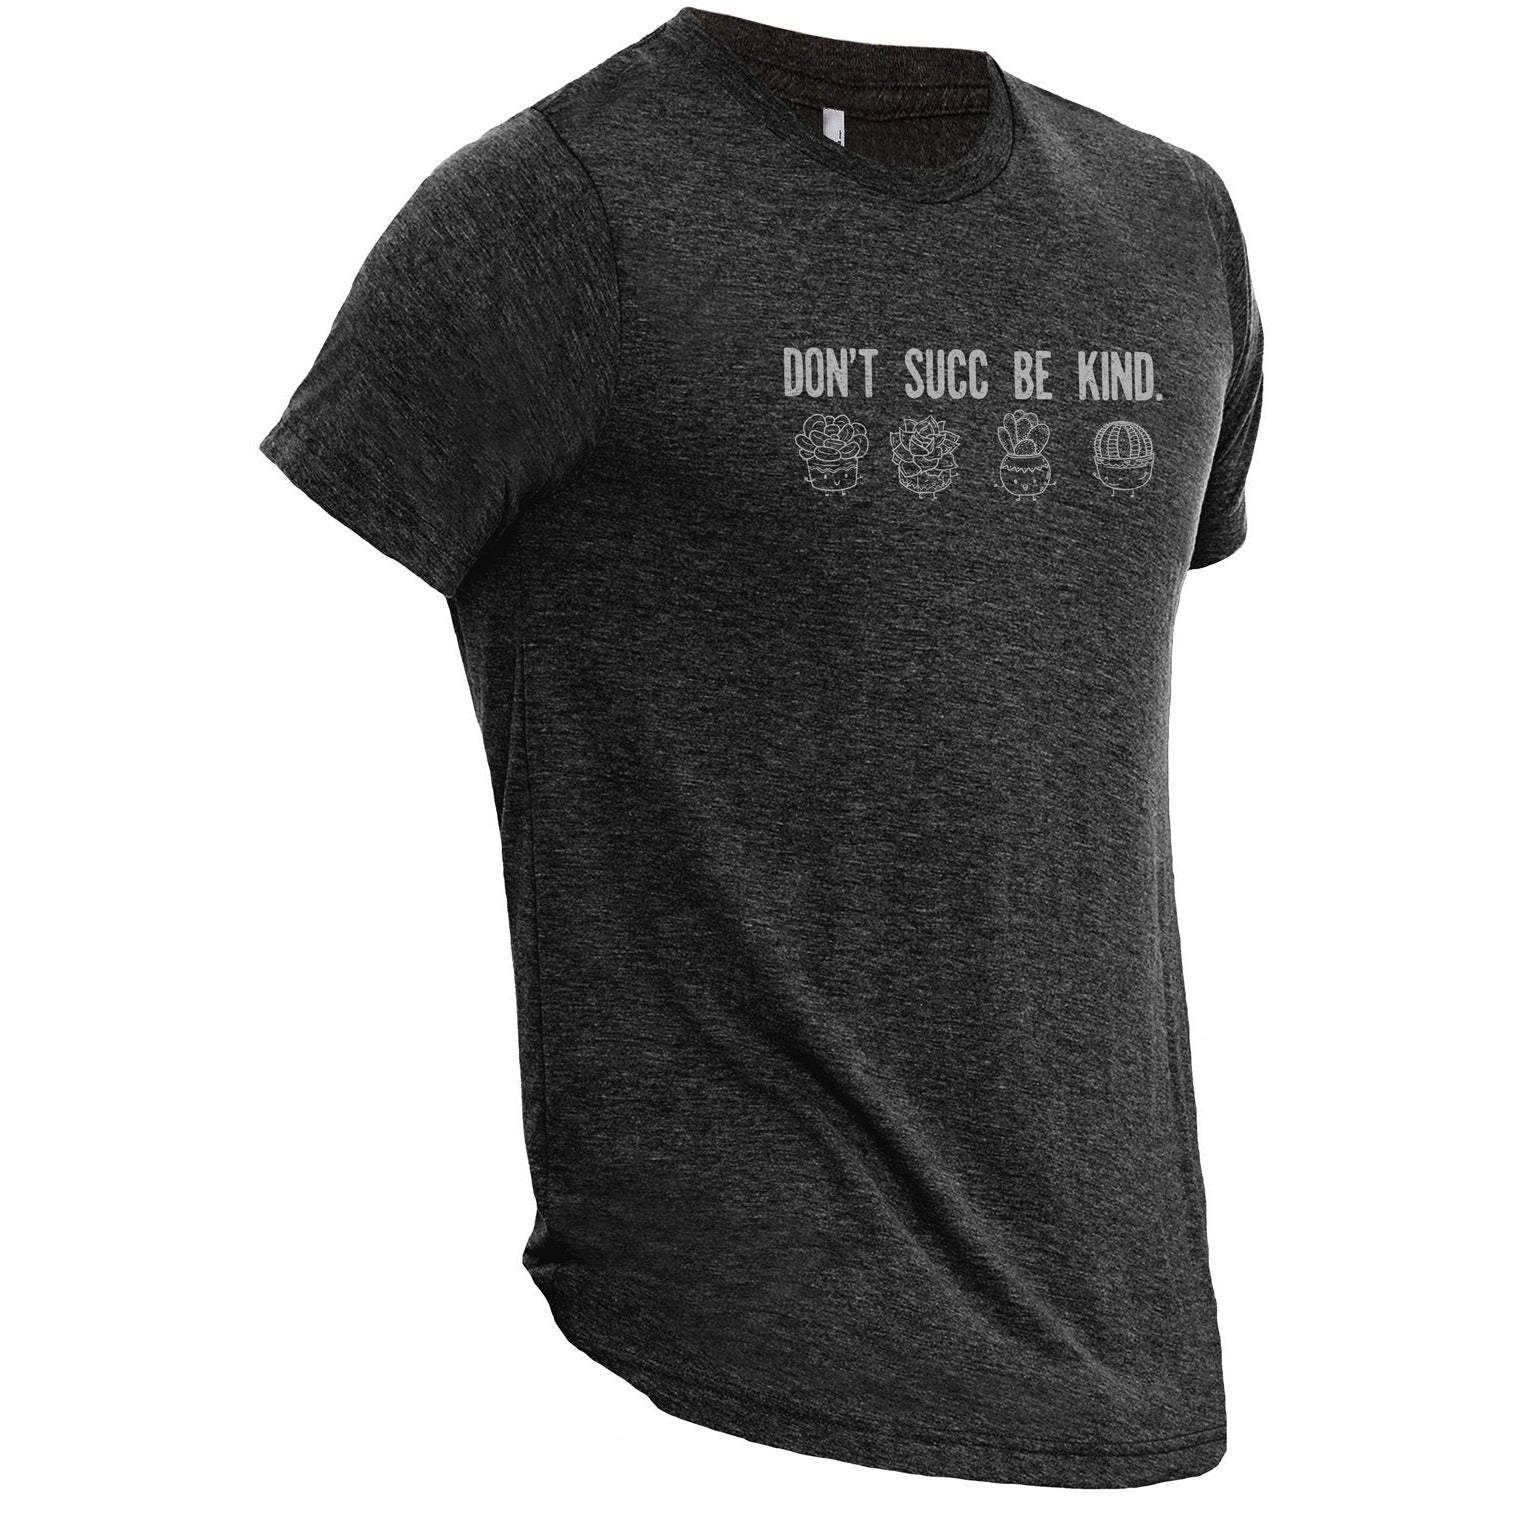 Don't Succ Be Kind Charcoal Printed Graphic Crew T-Shirt Tee